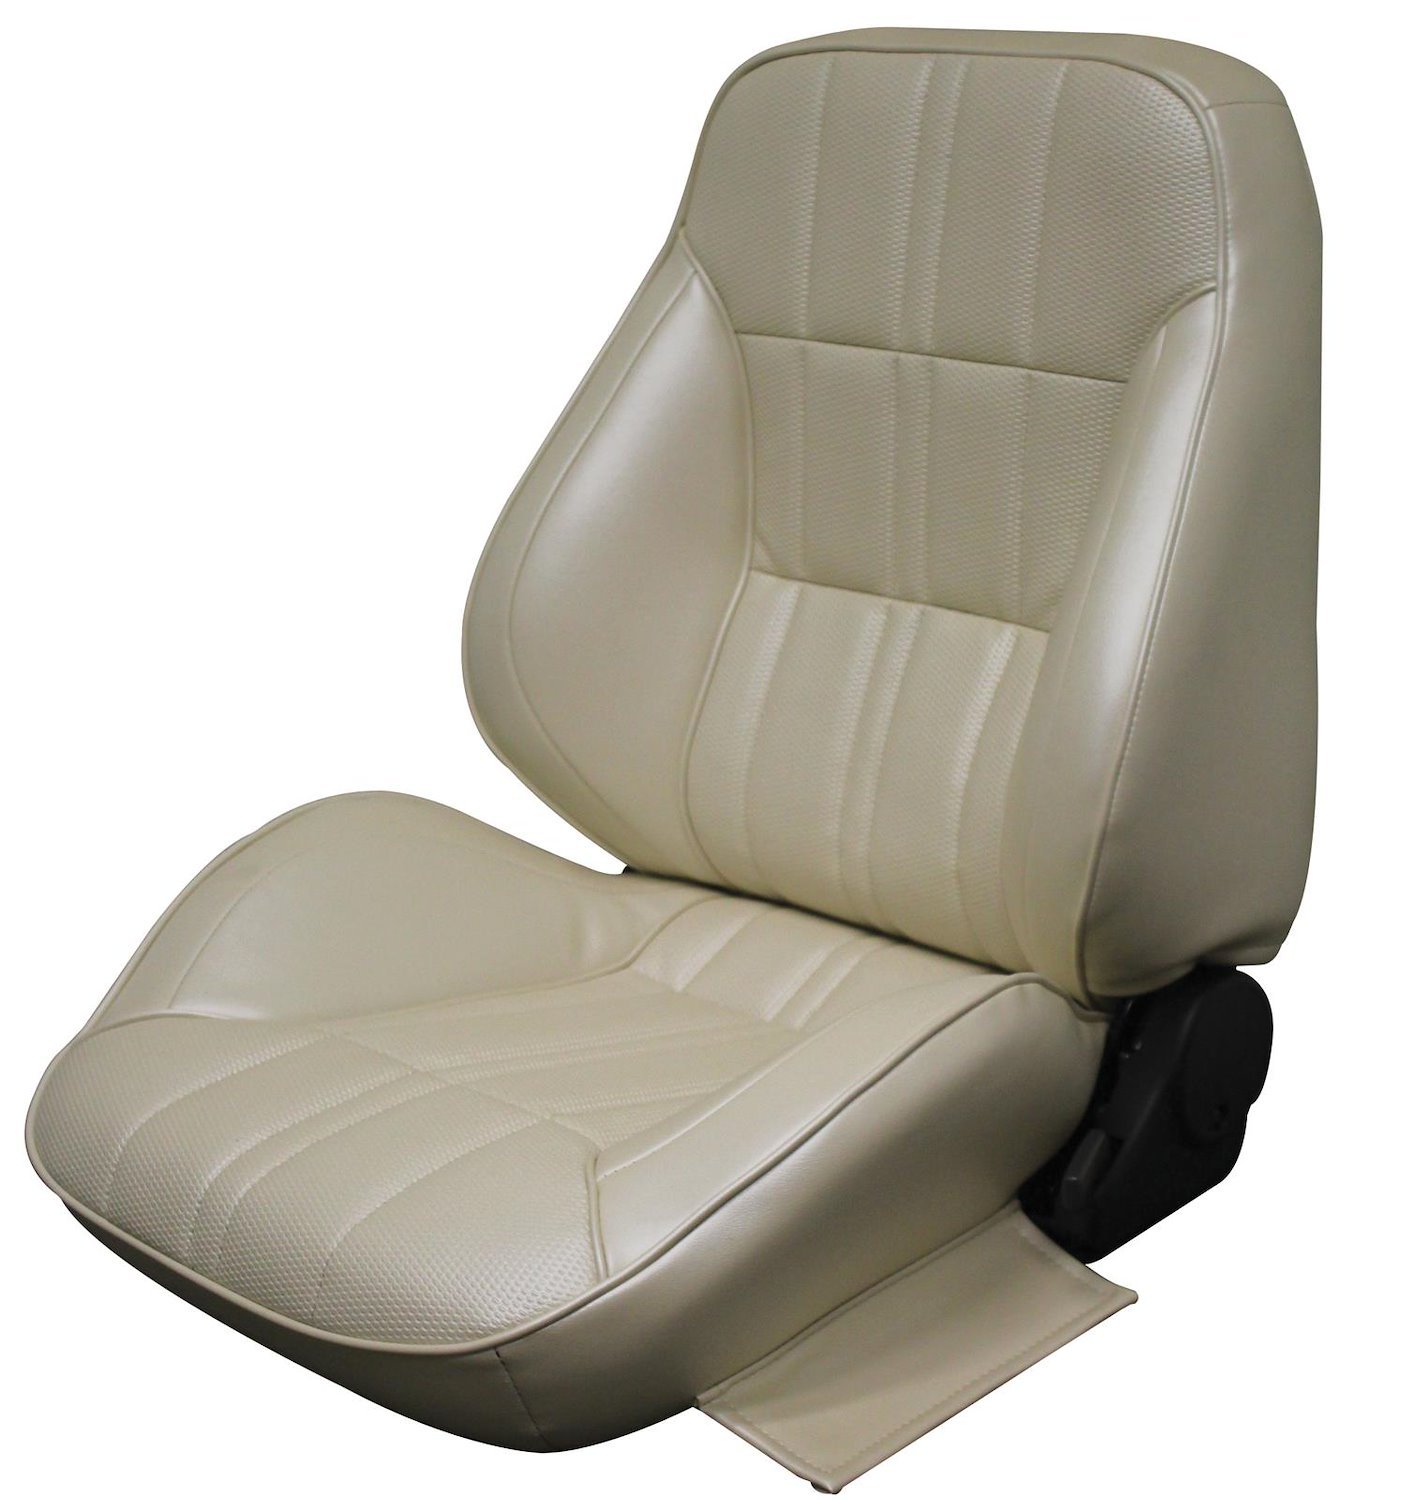 1971-1973 Ford Mustang Deluxe and Grande Interior Vermillion Touring II Preassembled Reclining Front Bucket Seats